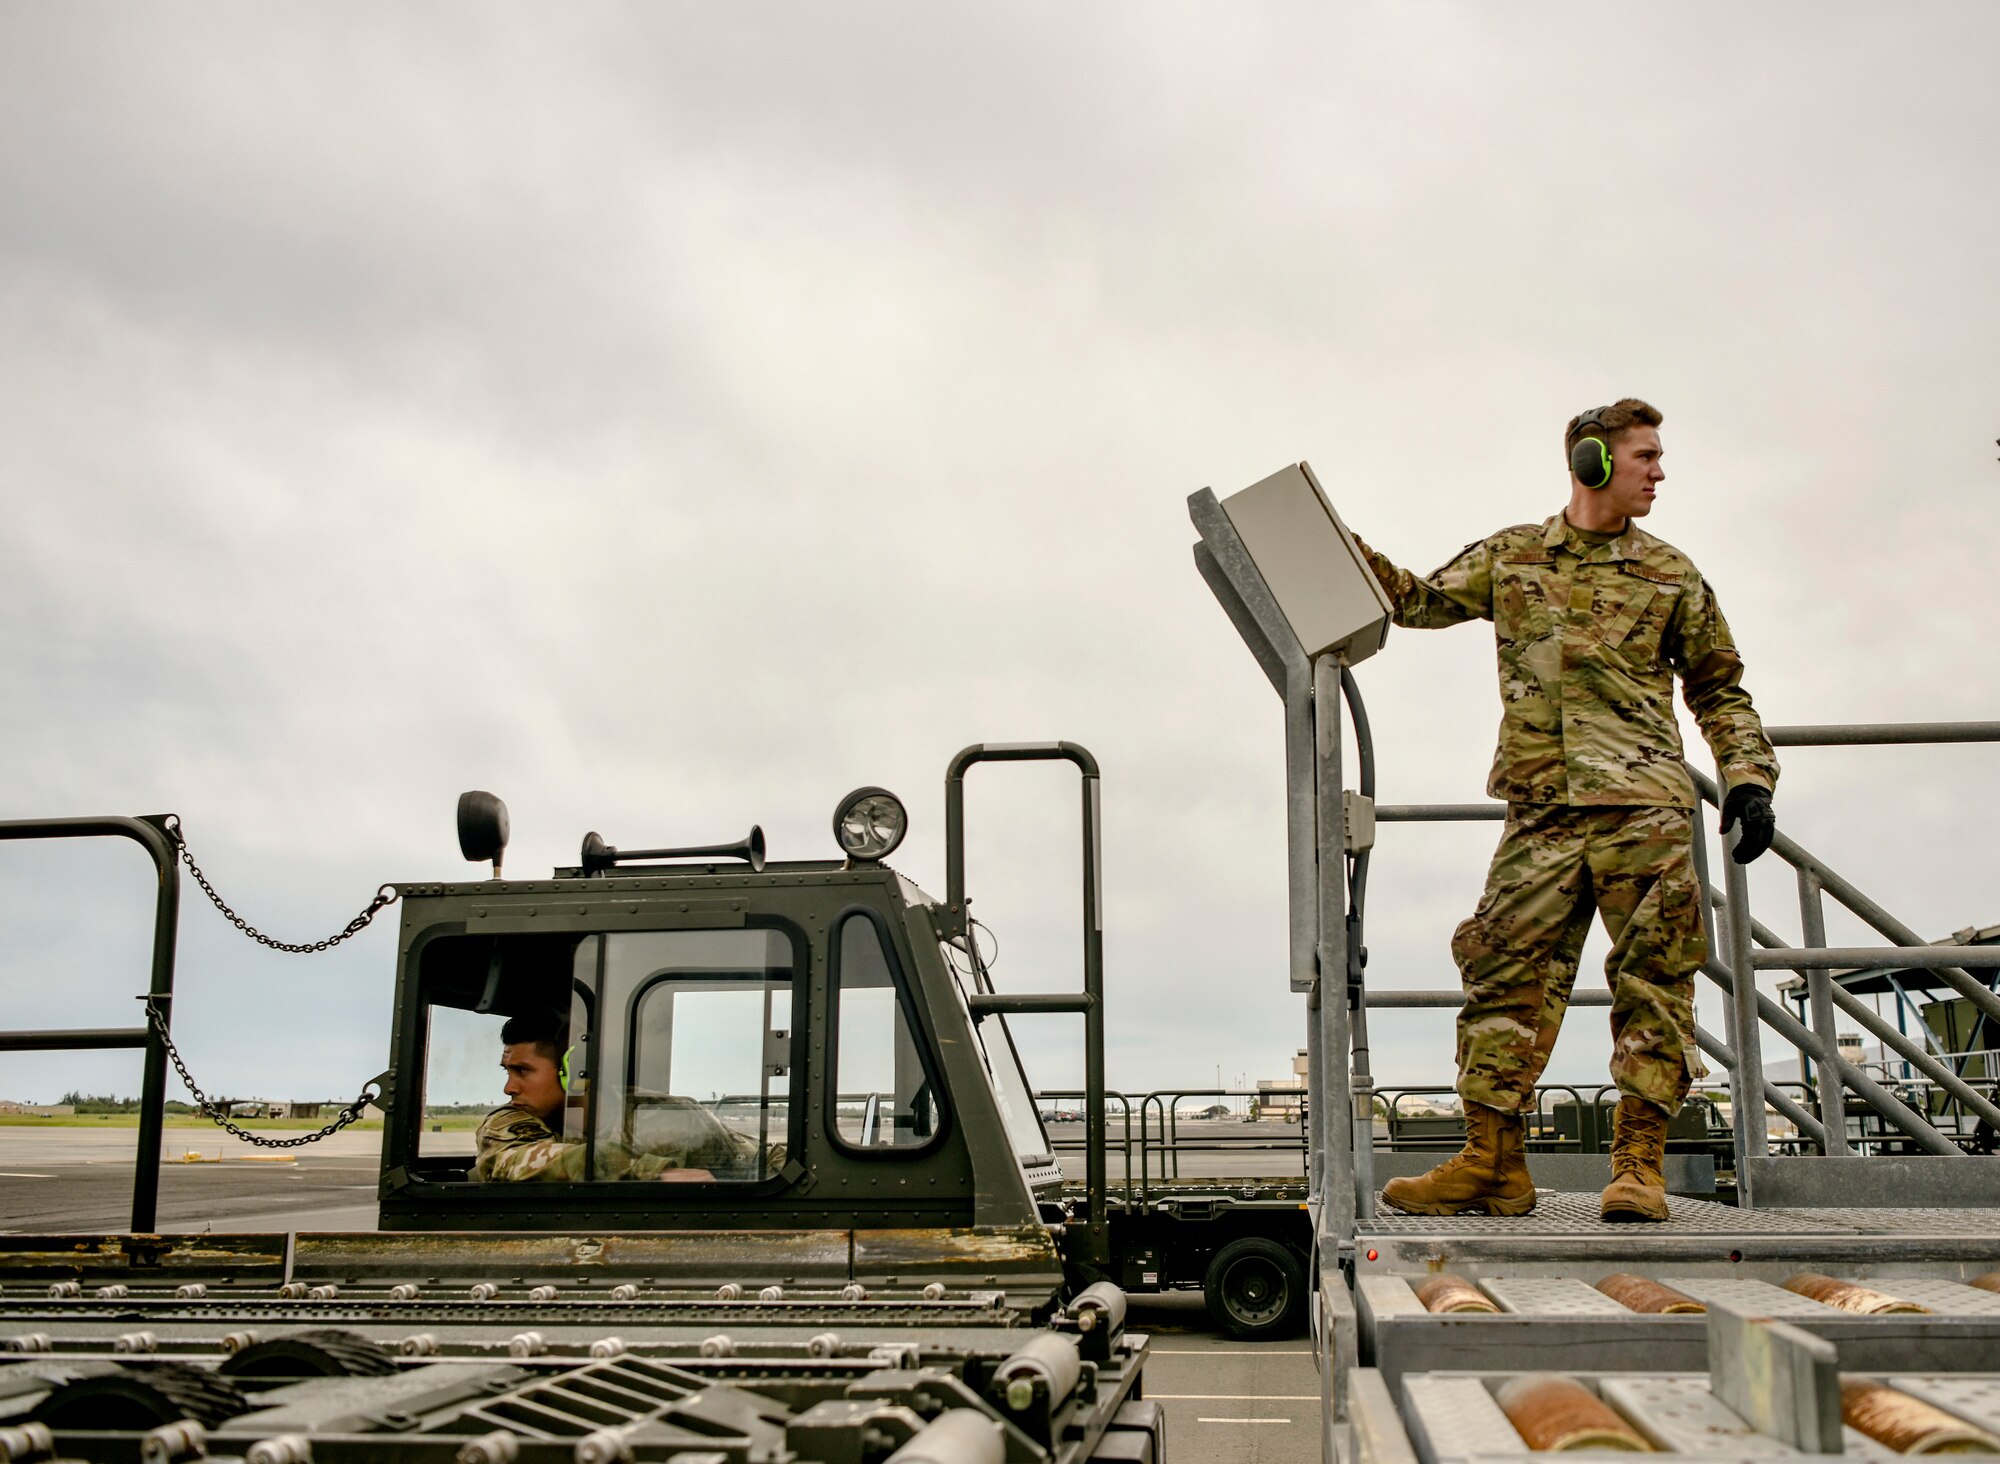 U.S. Air Force Senior Airman Mario Garcia and Airman Basic Brock Dowell, 735th Air Mobility Squadron air freight personnel,  load cargo on and off of a Tunner 60K loader into a dock at Joint Base Pearl Harbor-Hickam, Hawaii, March 31, 2020. The 735th AMS supports global airlift in the Indo-Pacific area. (U.S. Air Force photo by Tech. Sgt. Anthony Nelson Jr.)